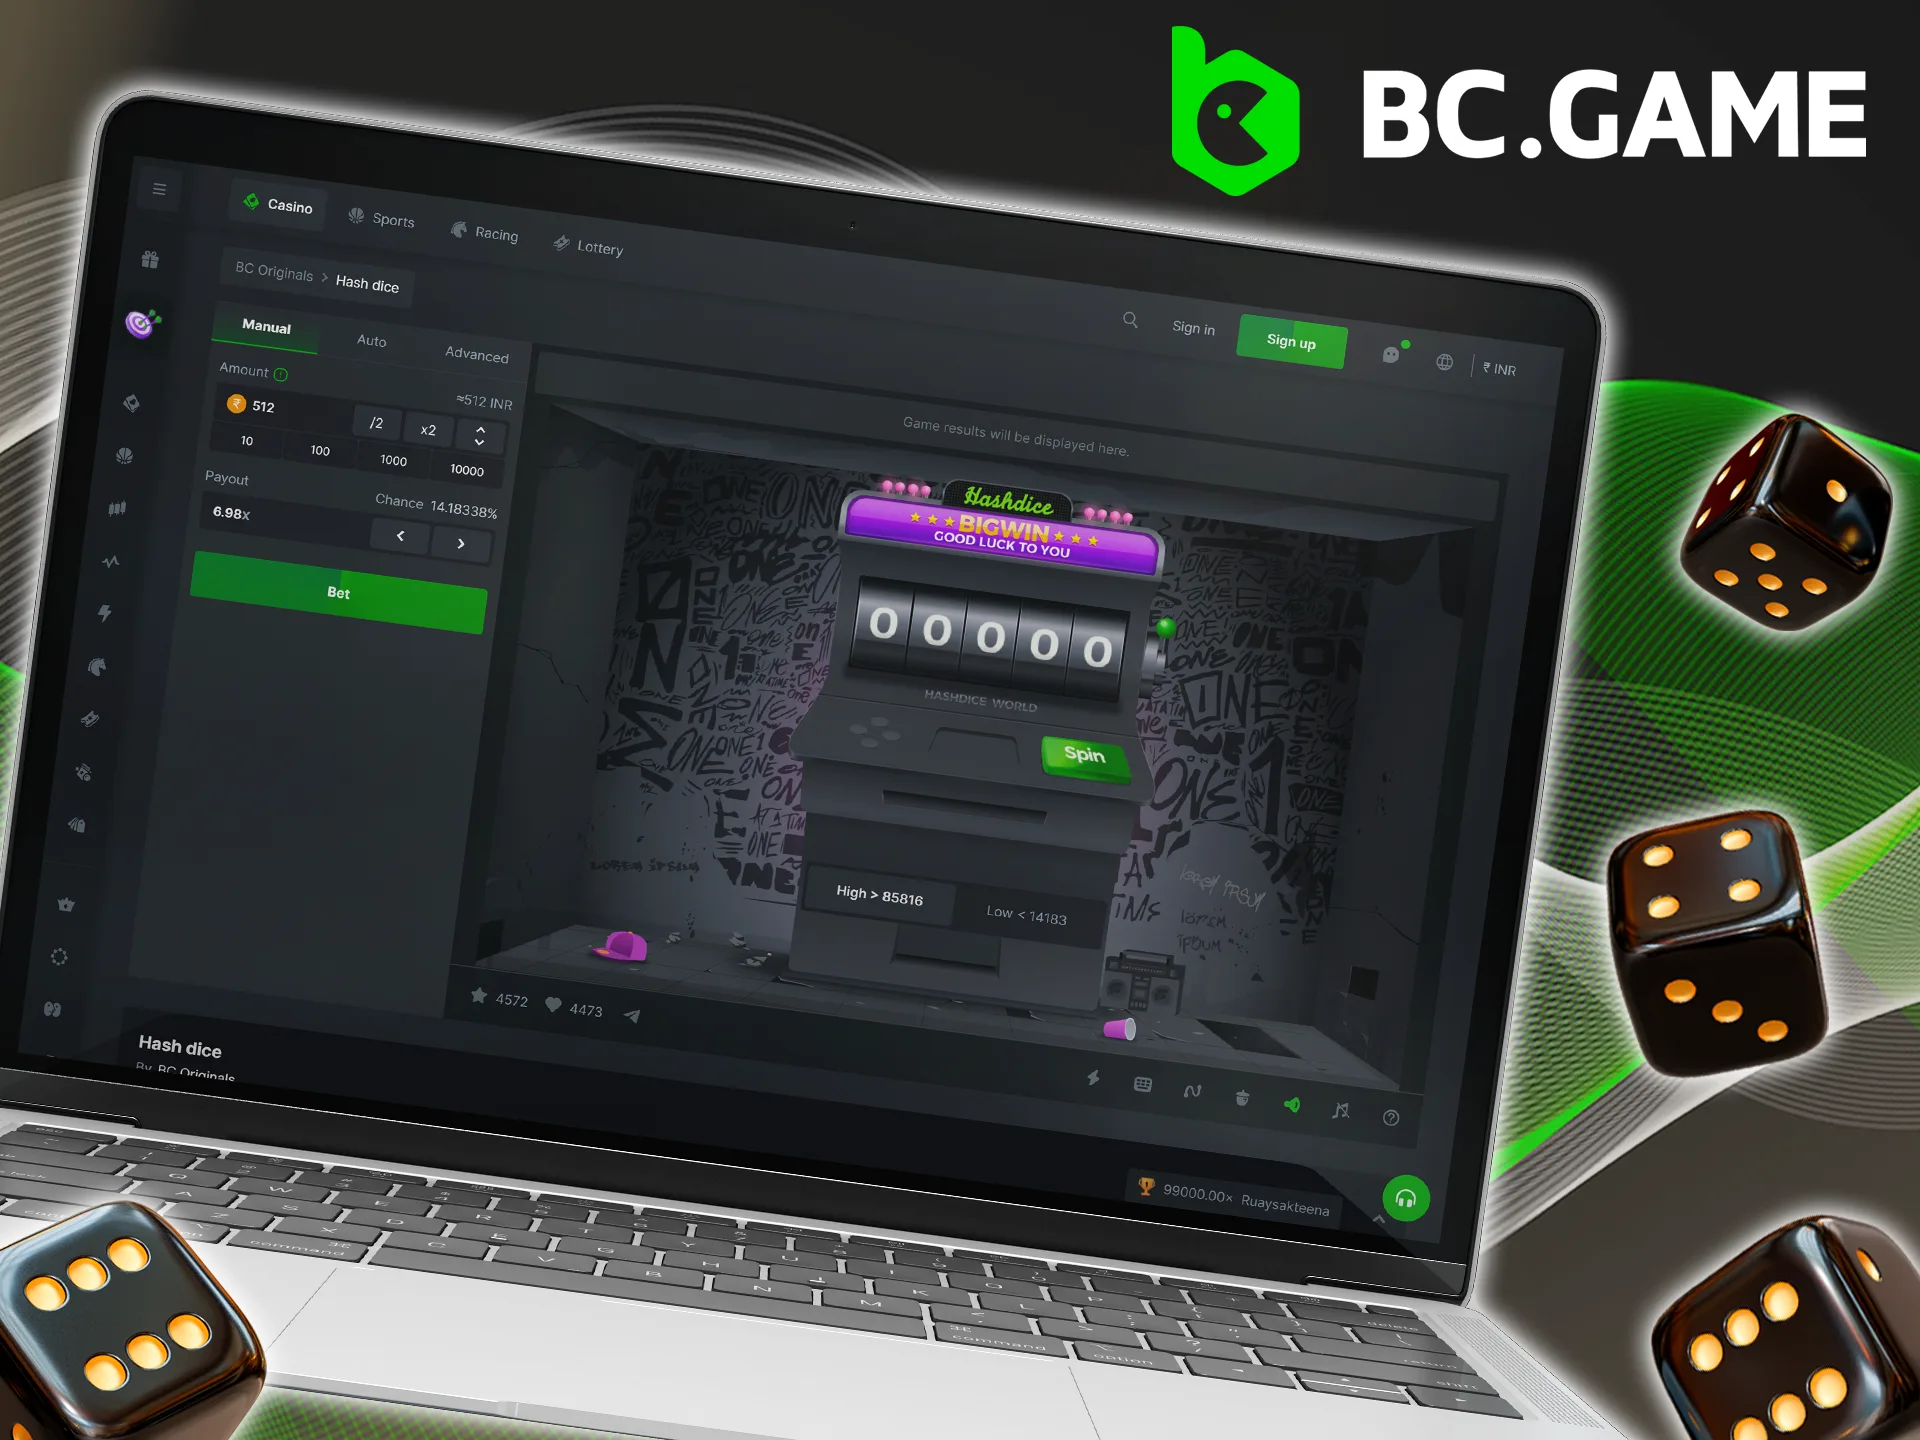 Register with BC Game, fund your account and have fun playing Hash Dice.